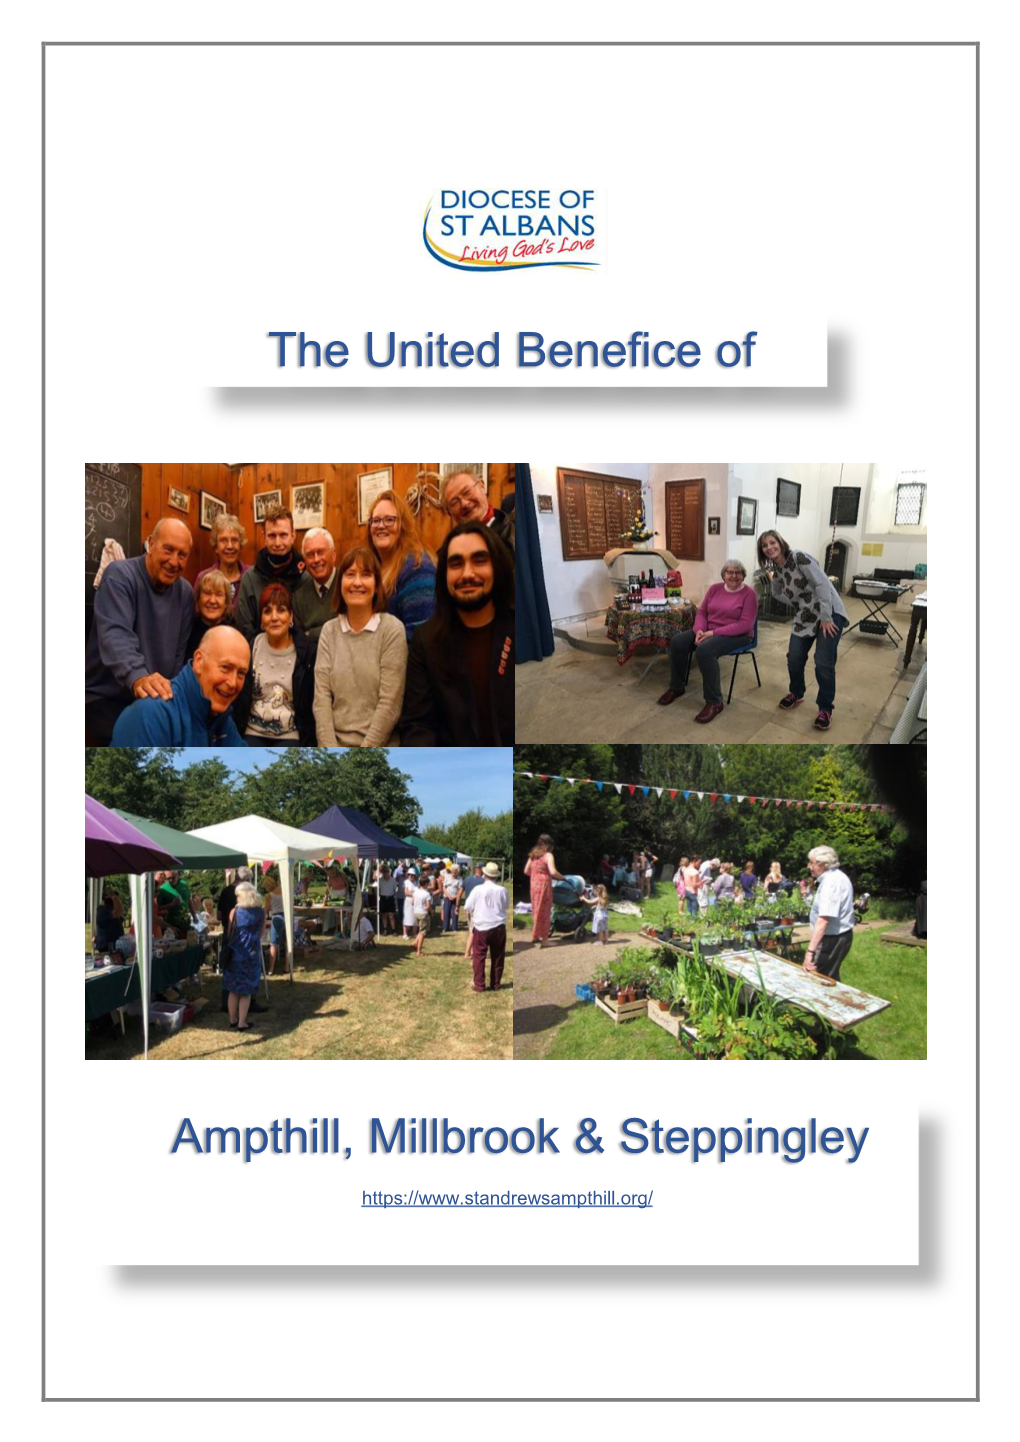 Ampthill, Millbrook & Steppingley the United Benefice Of